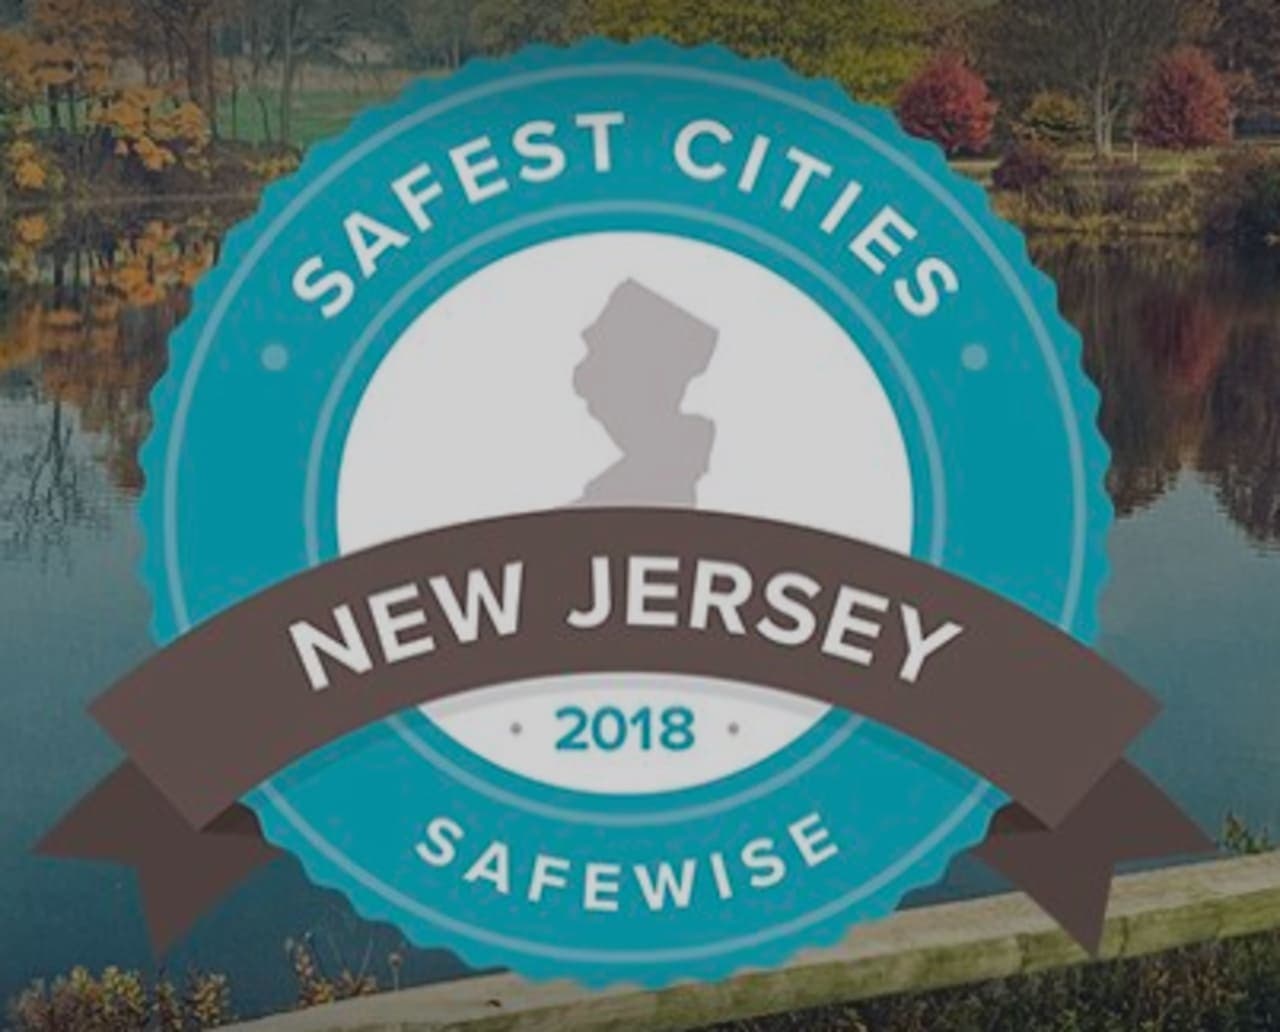 Safewise released its 2018 list of safest cities in New Jersey.